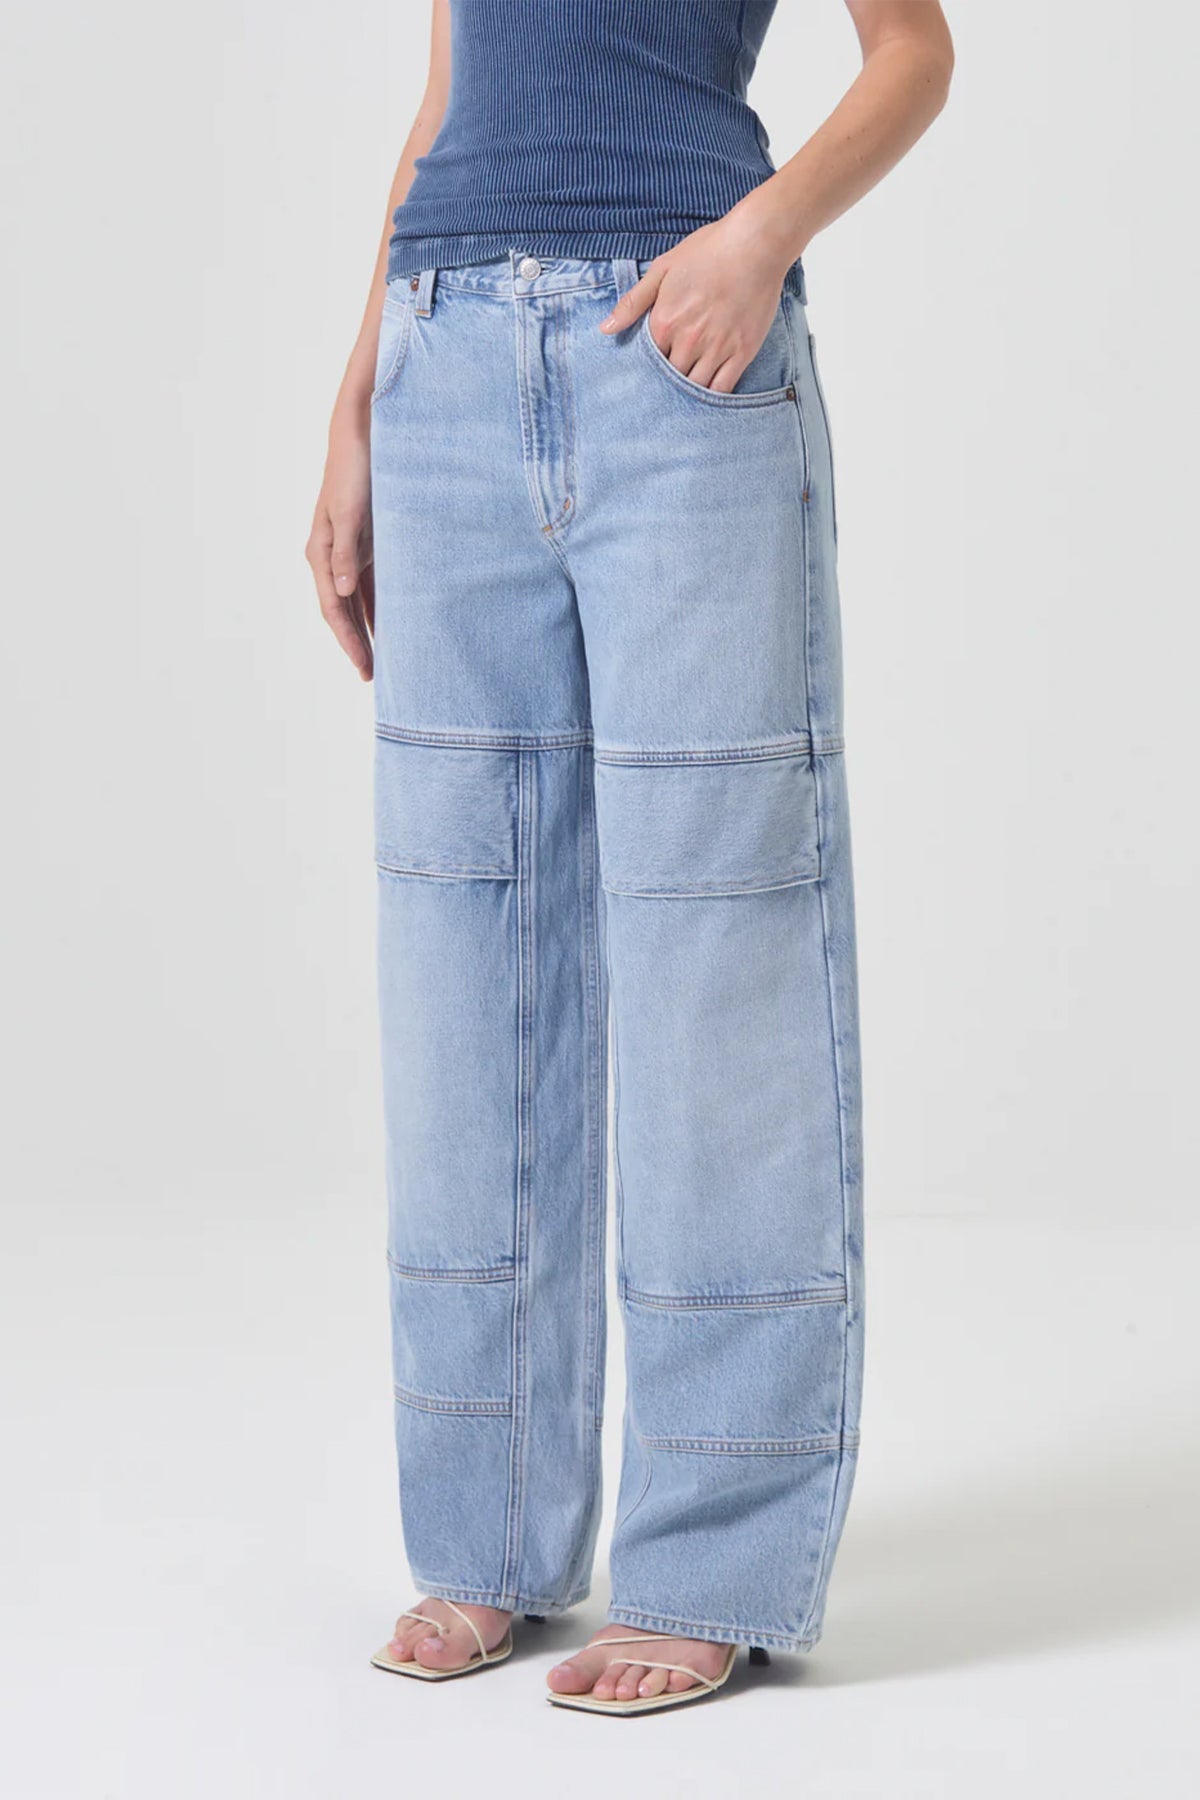 Tanis Utility Jean in Conflict - shop-olivia.com